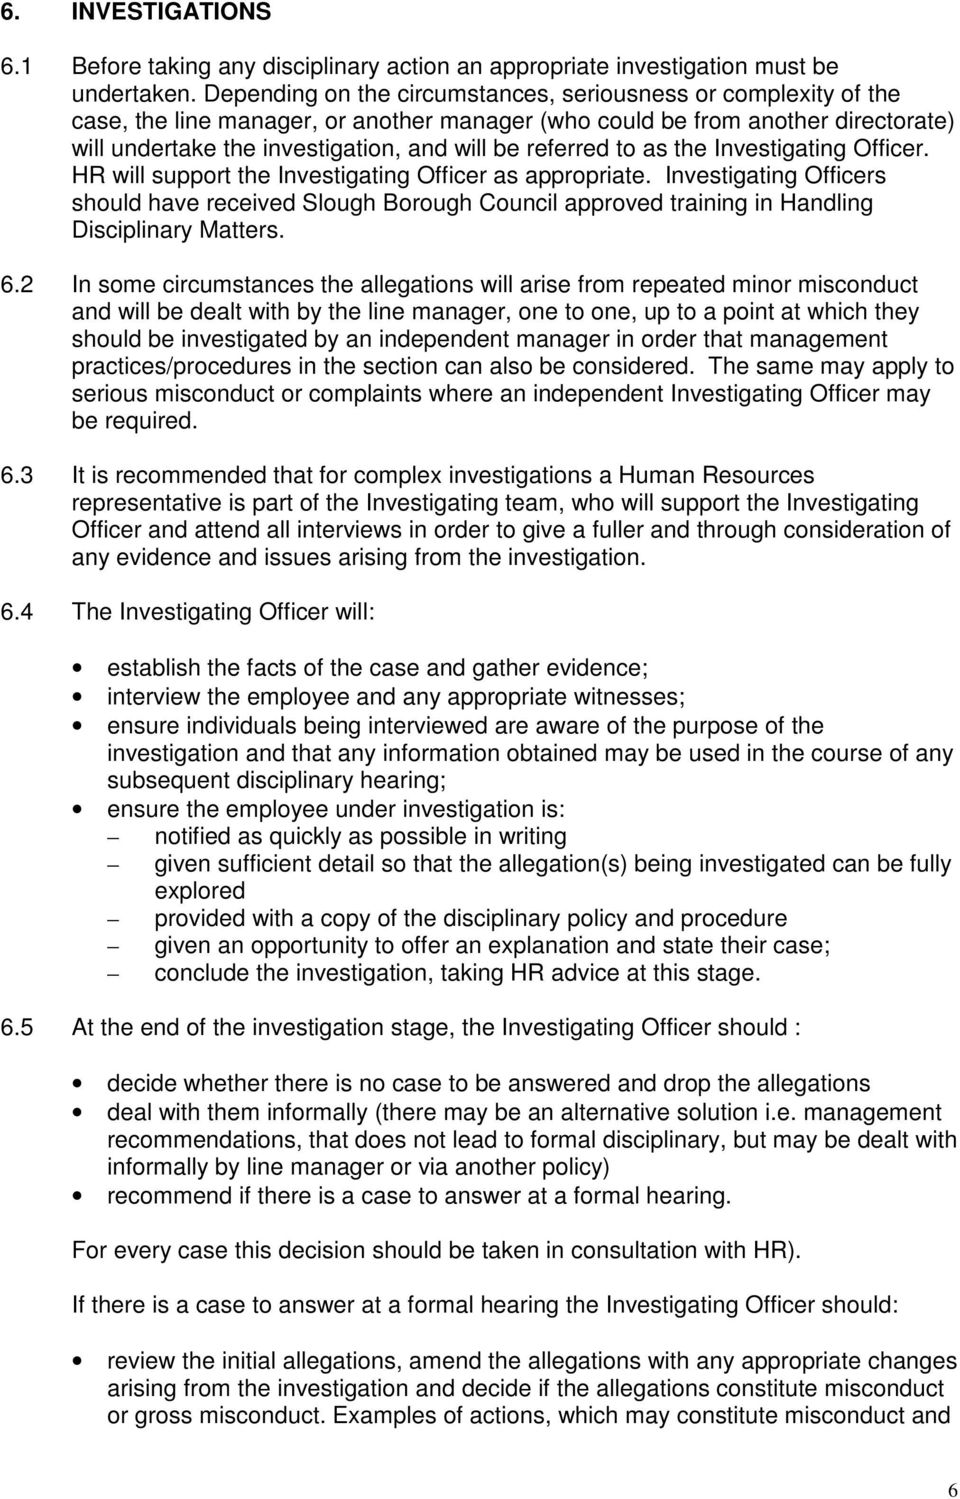 referred to as the Investigating Officer. HR will support the Investigating Officer as appropriate.